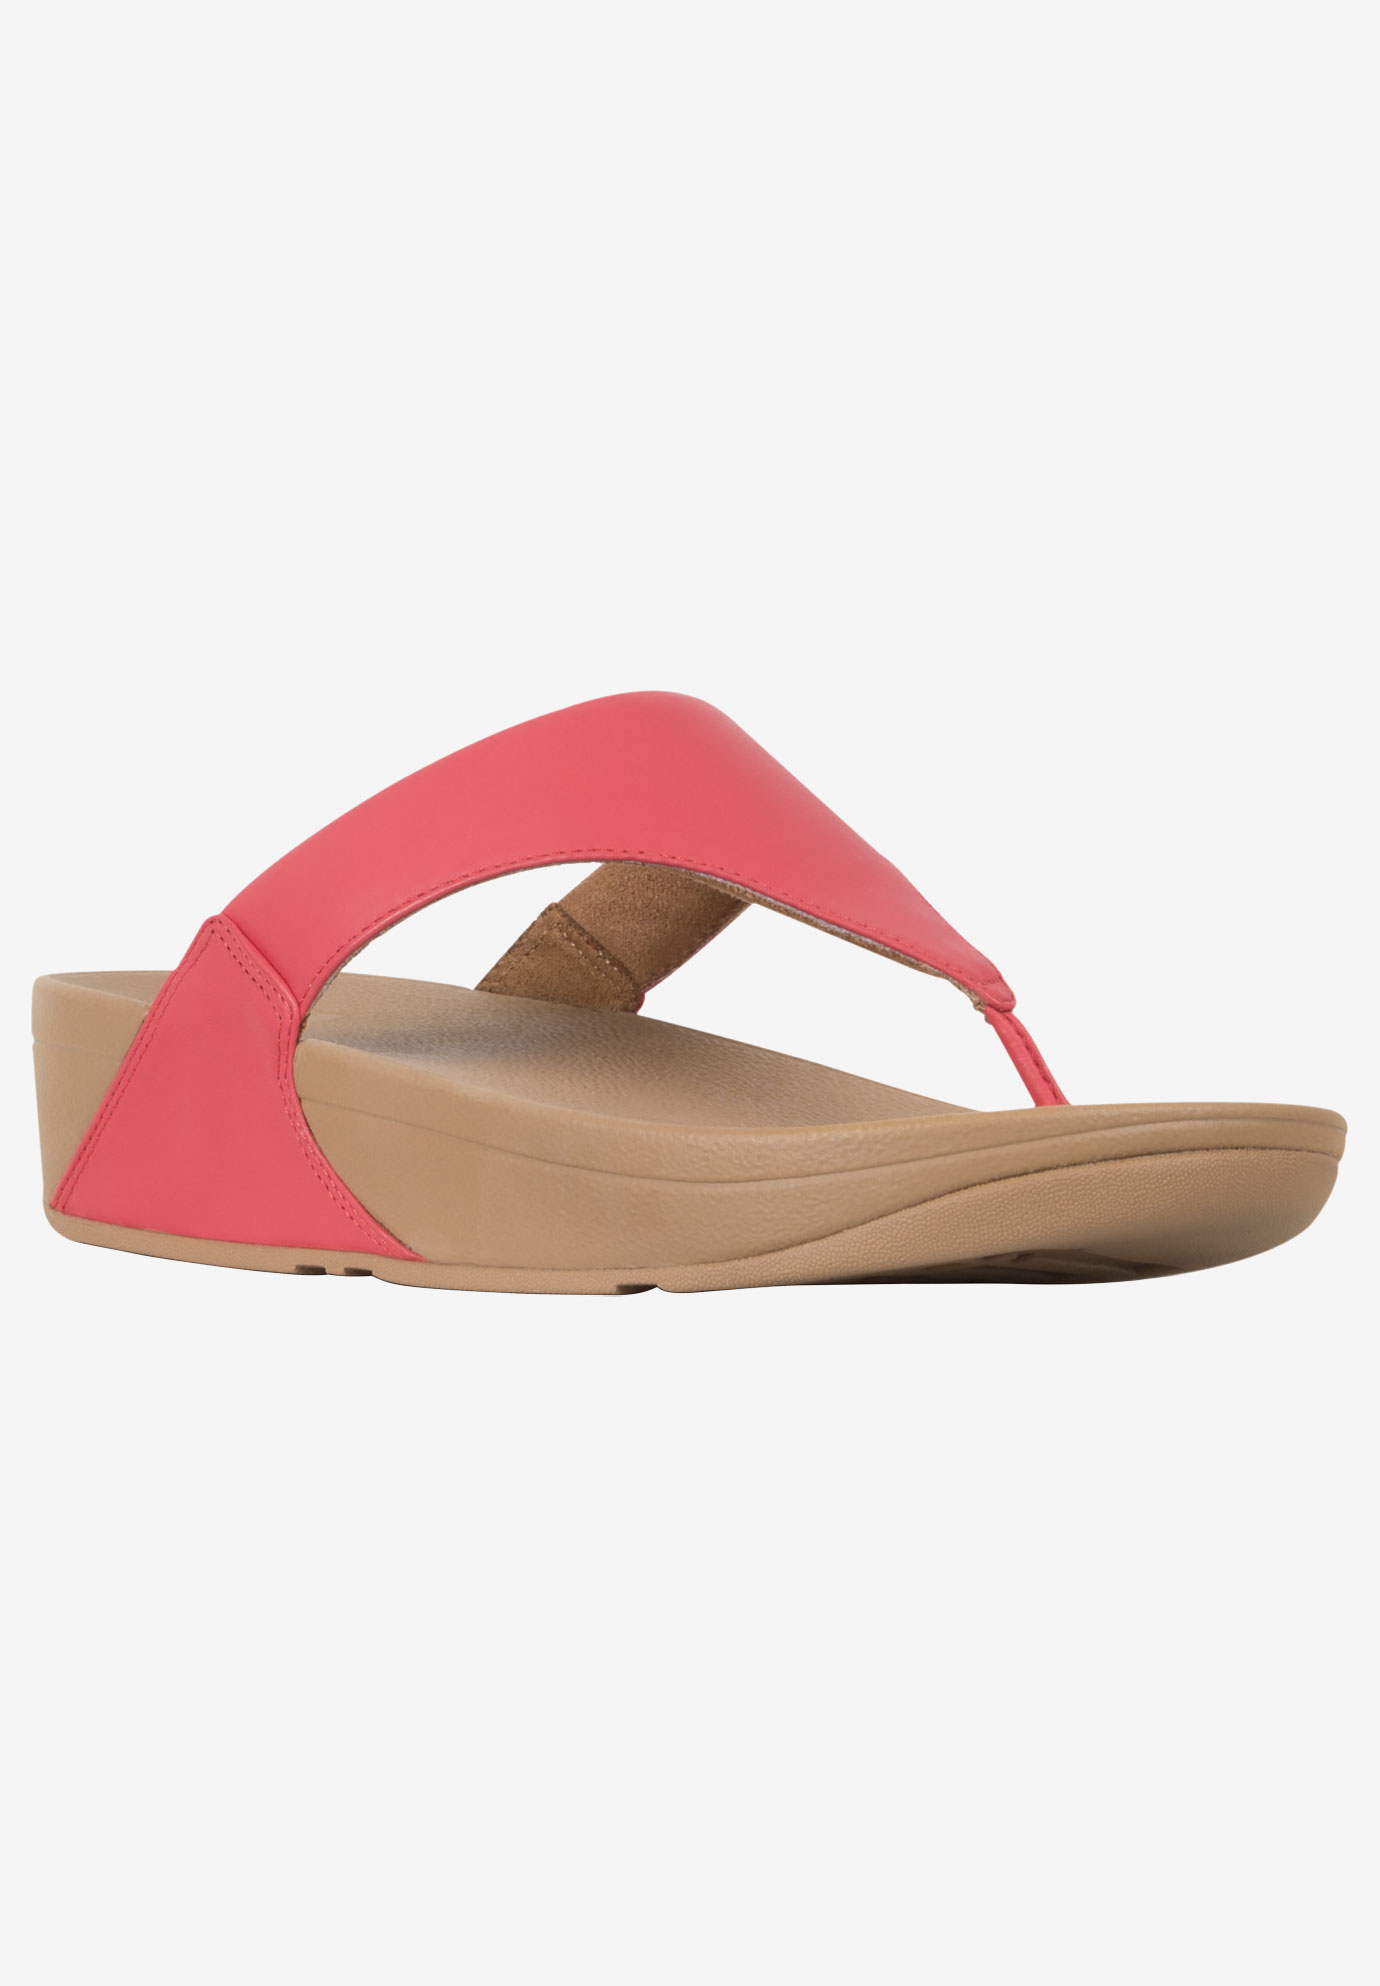 Lulu Leather Toe Post Sandal by FitFlop| Plus Size Casual Sandals ...